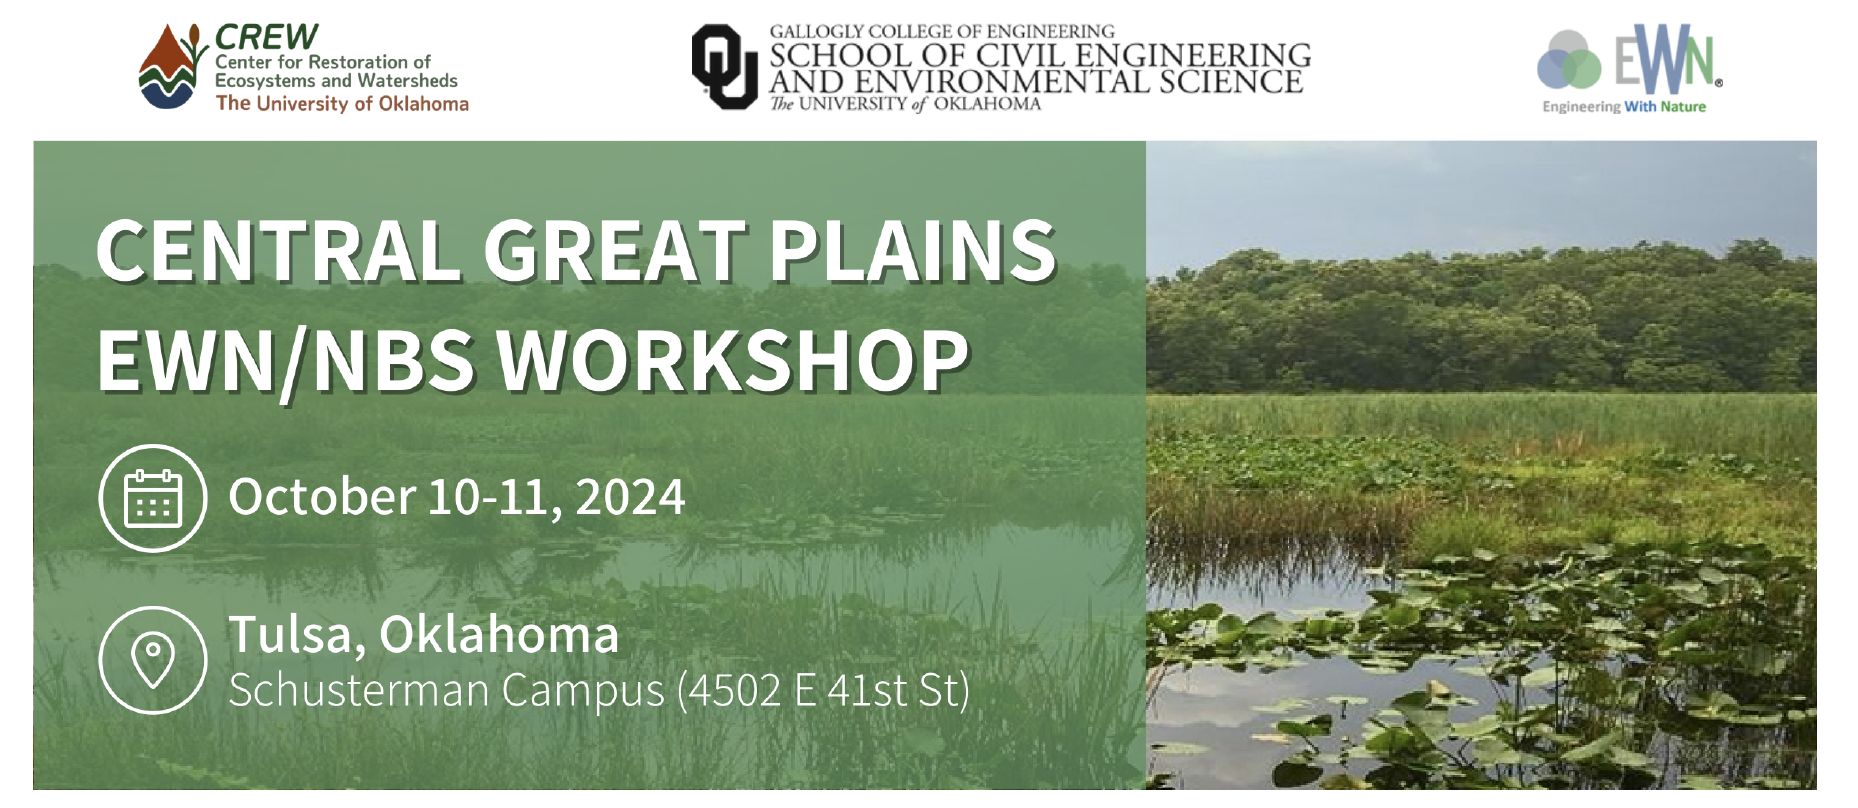 Image and text about the Central Great Plains EWN/NBS Workshop October 10-11, 2024 at the Schusterman Campus in Tulsa, OK